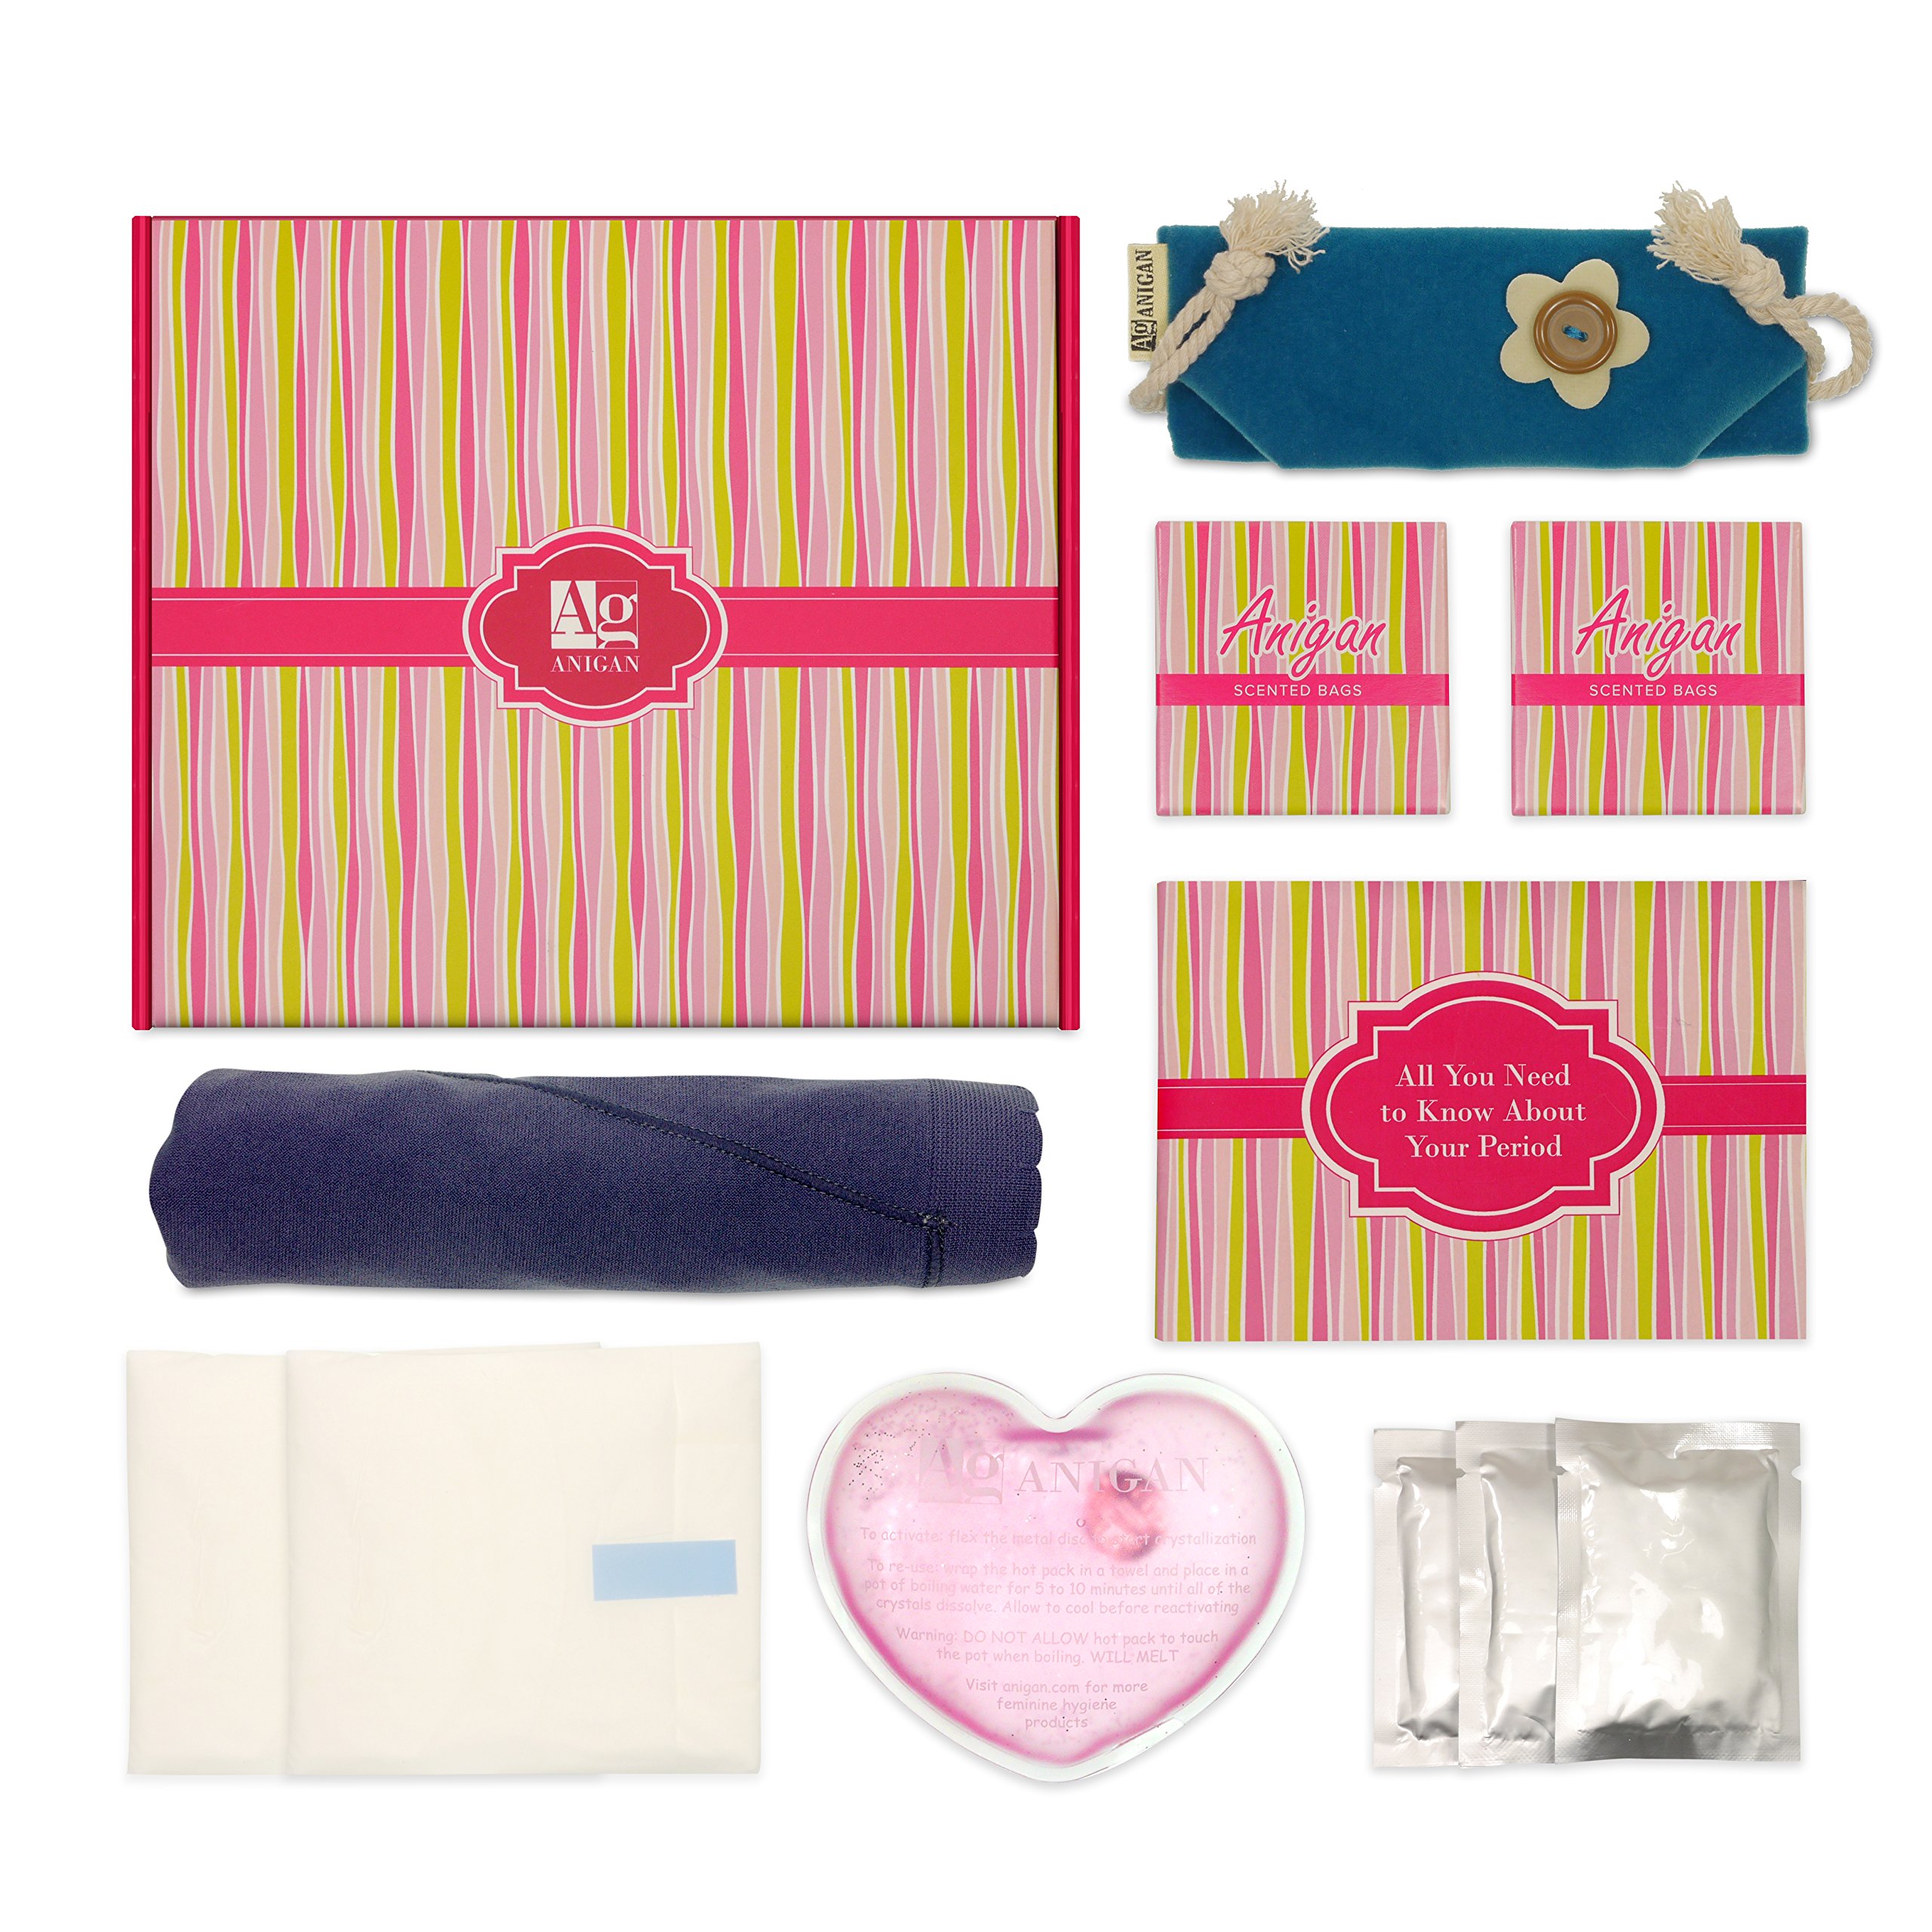 Anigan First Period Kit with Hipster Menstrual Panties, Instant Heat Pad, Informational Booklet & More, XS Blue